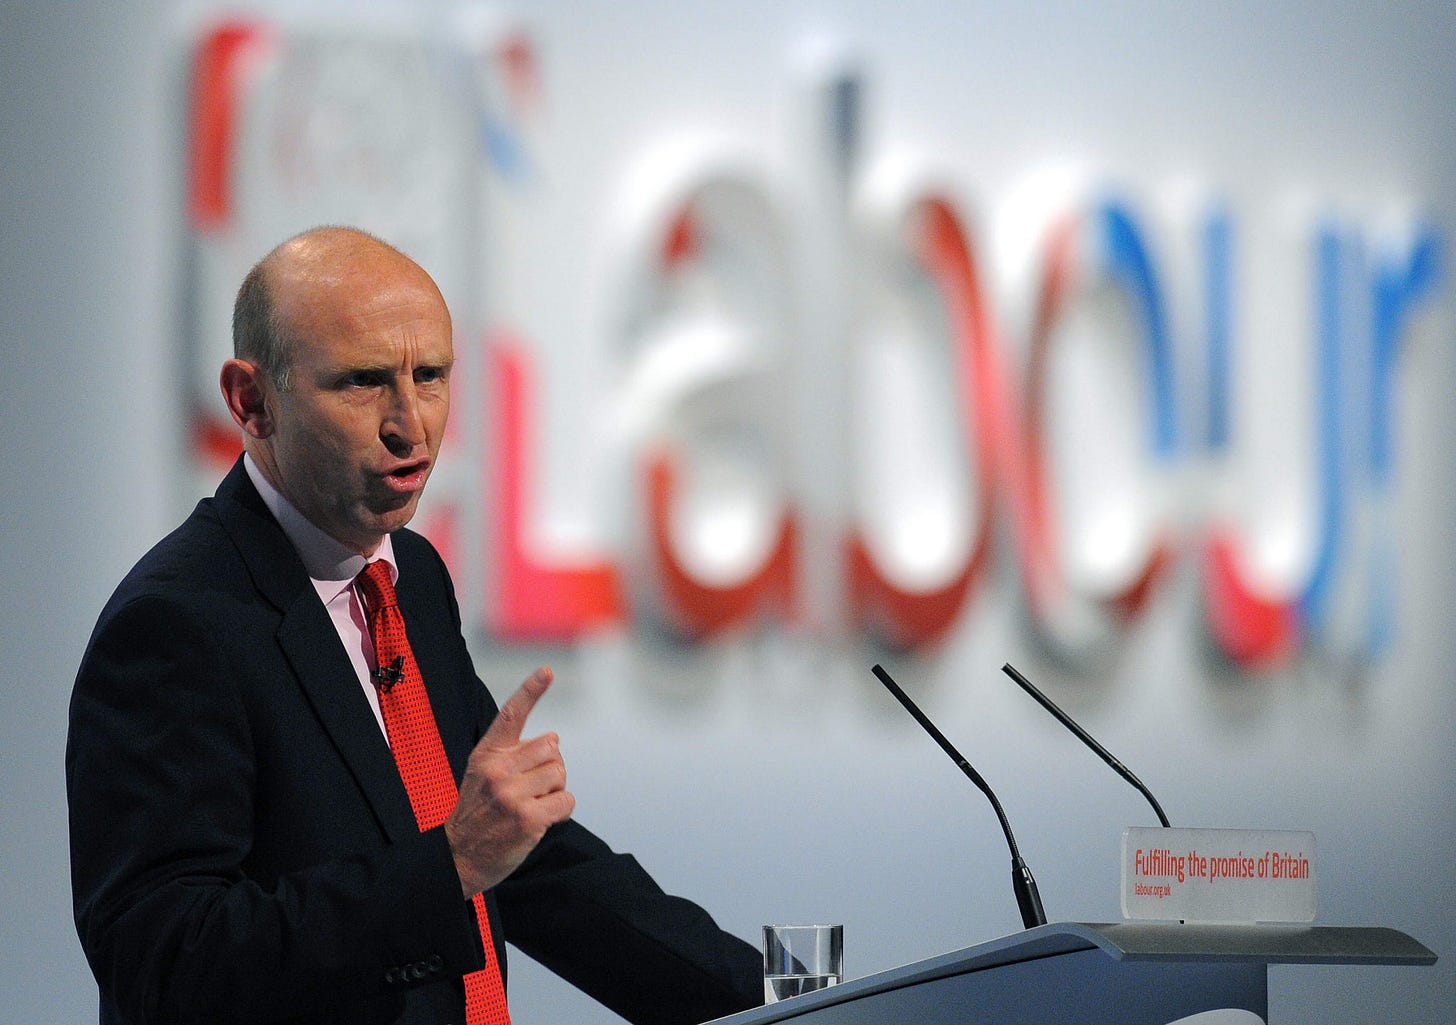 John Healey interview: Labour must unite behind Jeremy Corbyn as long as  he's leader